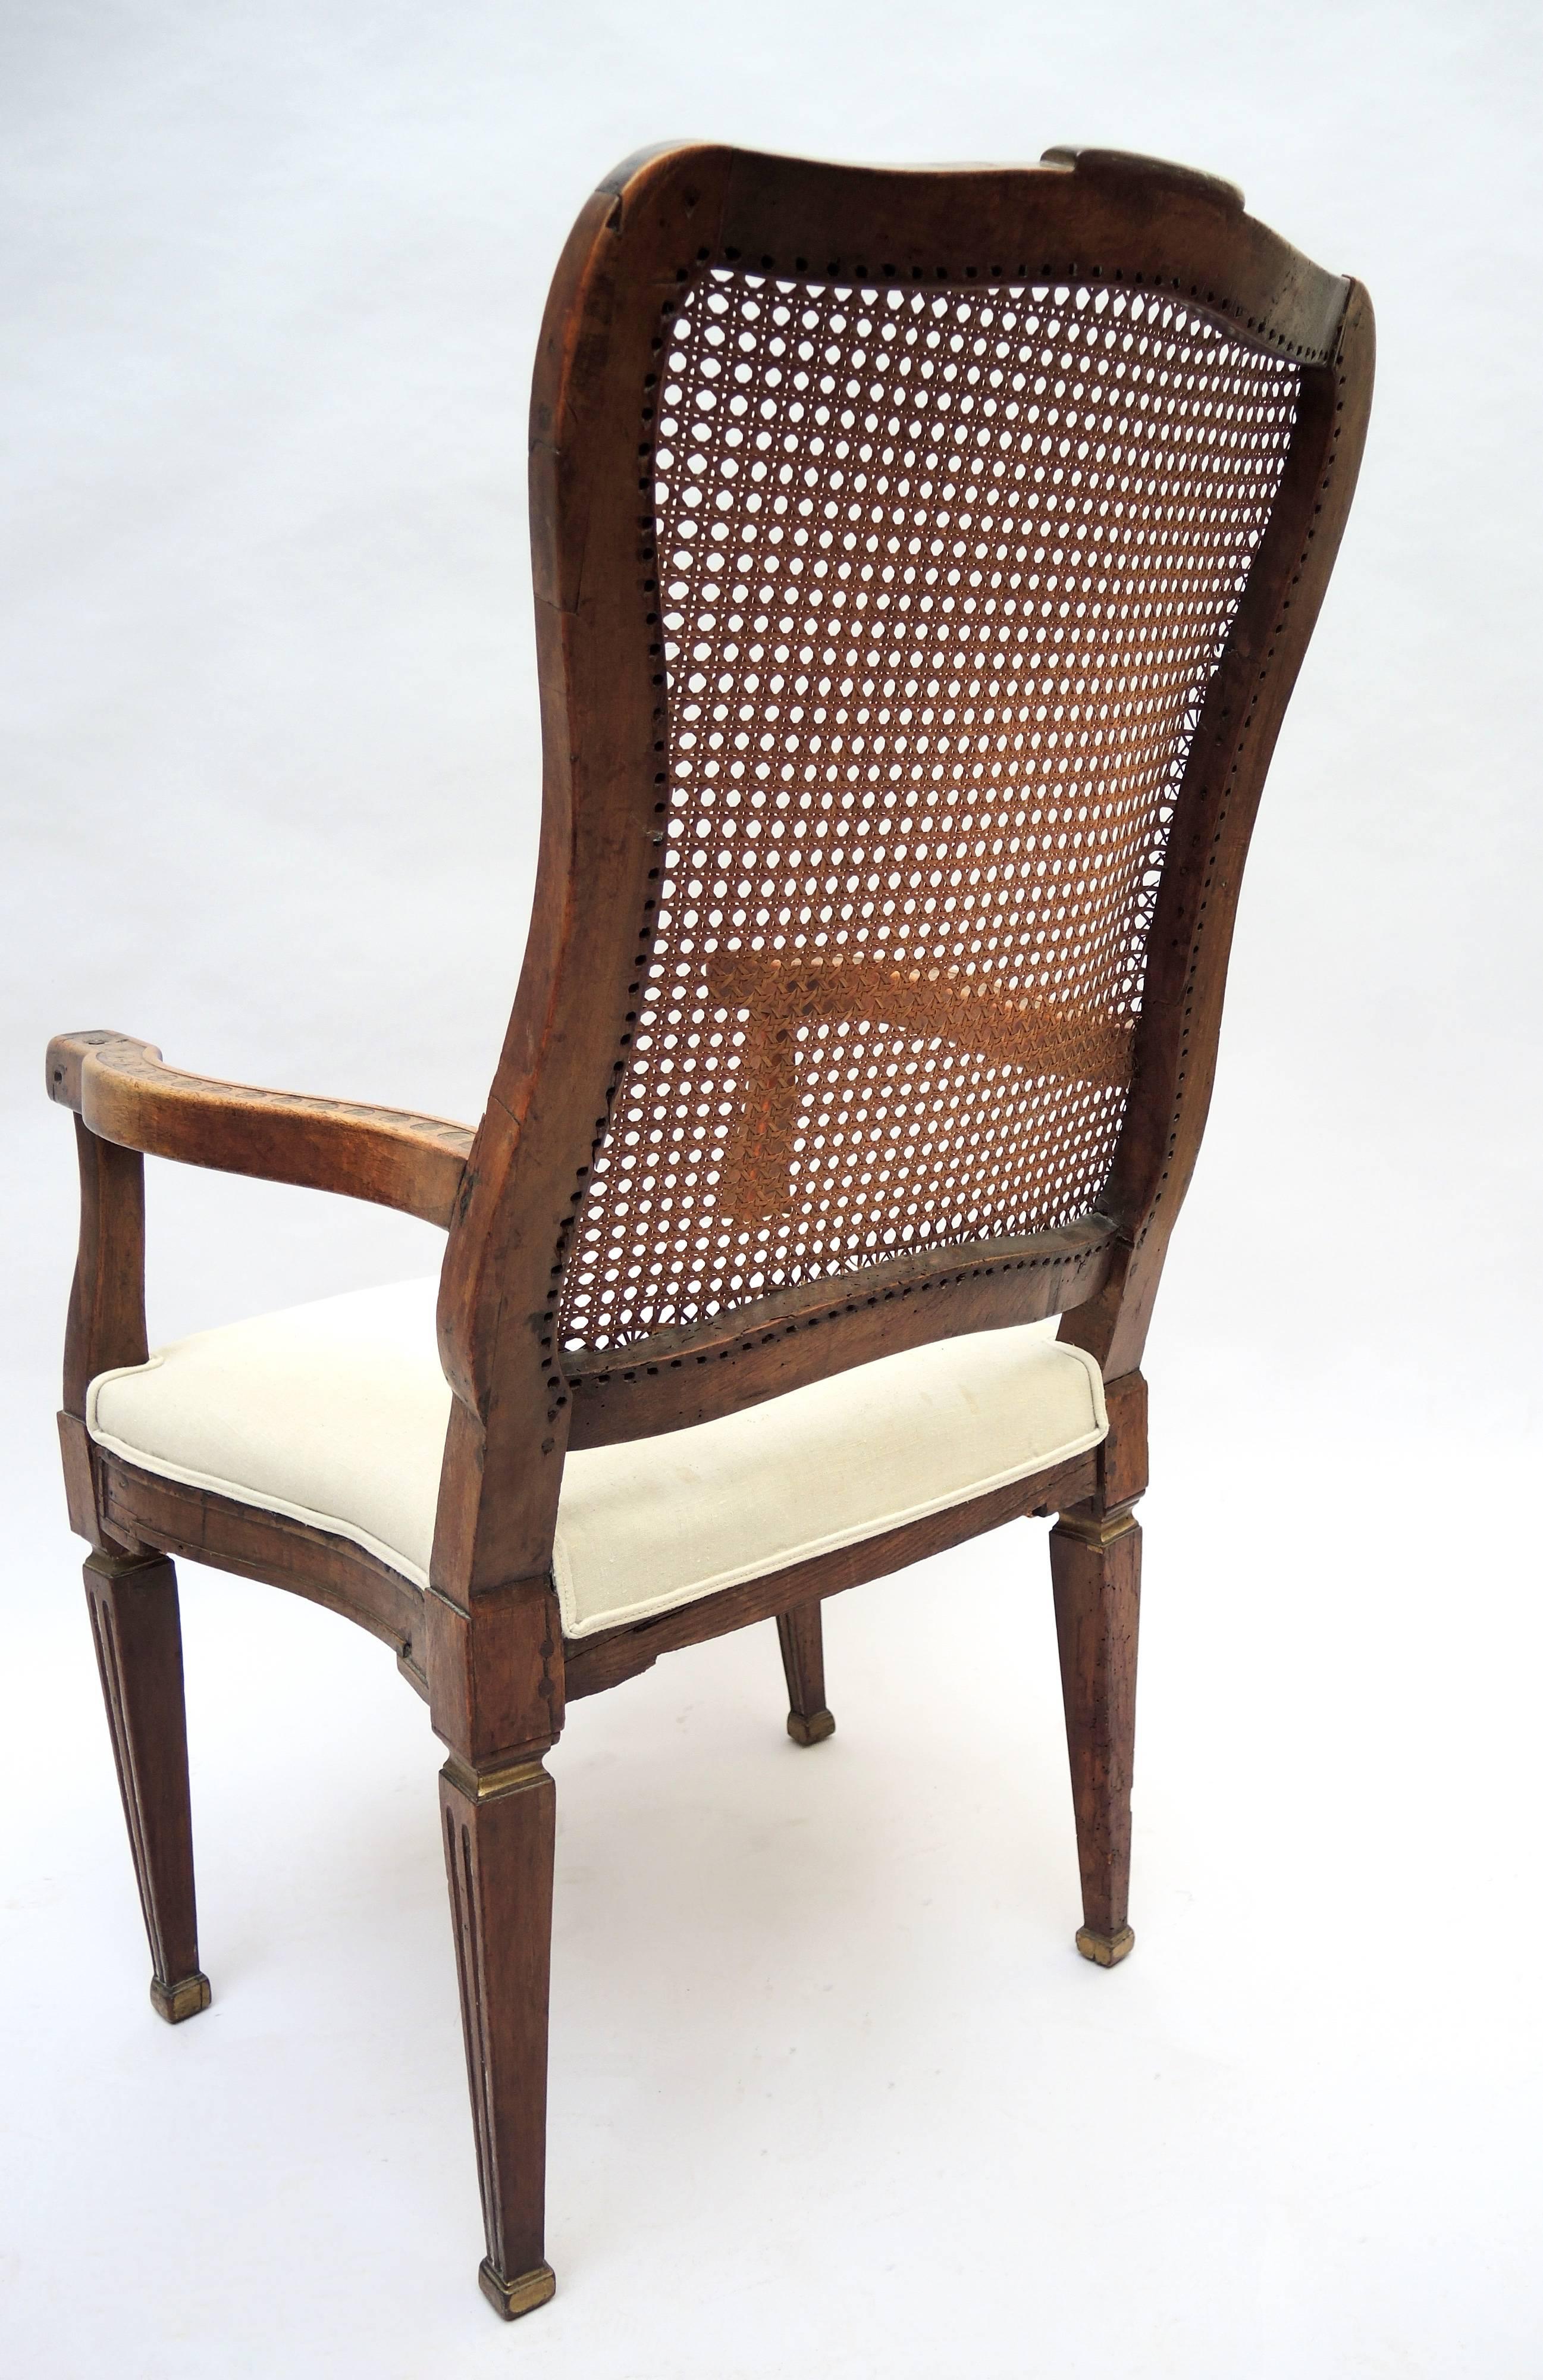 Dutch armchair retaining the original cane woven back, circa 1820. Pegged construction and beautiful patina complete this elegant and unusual armchair.
In very good firm condition with a newly upholstered seat using antique Flemish Linen.